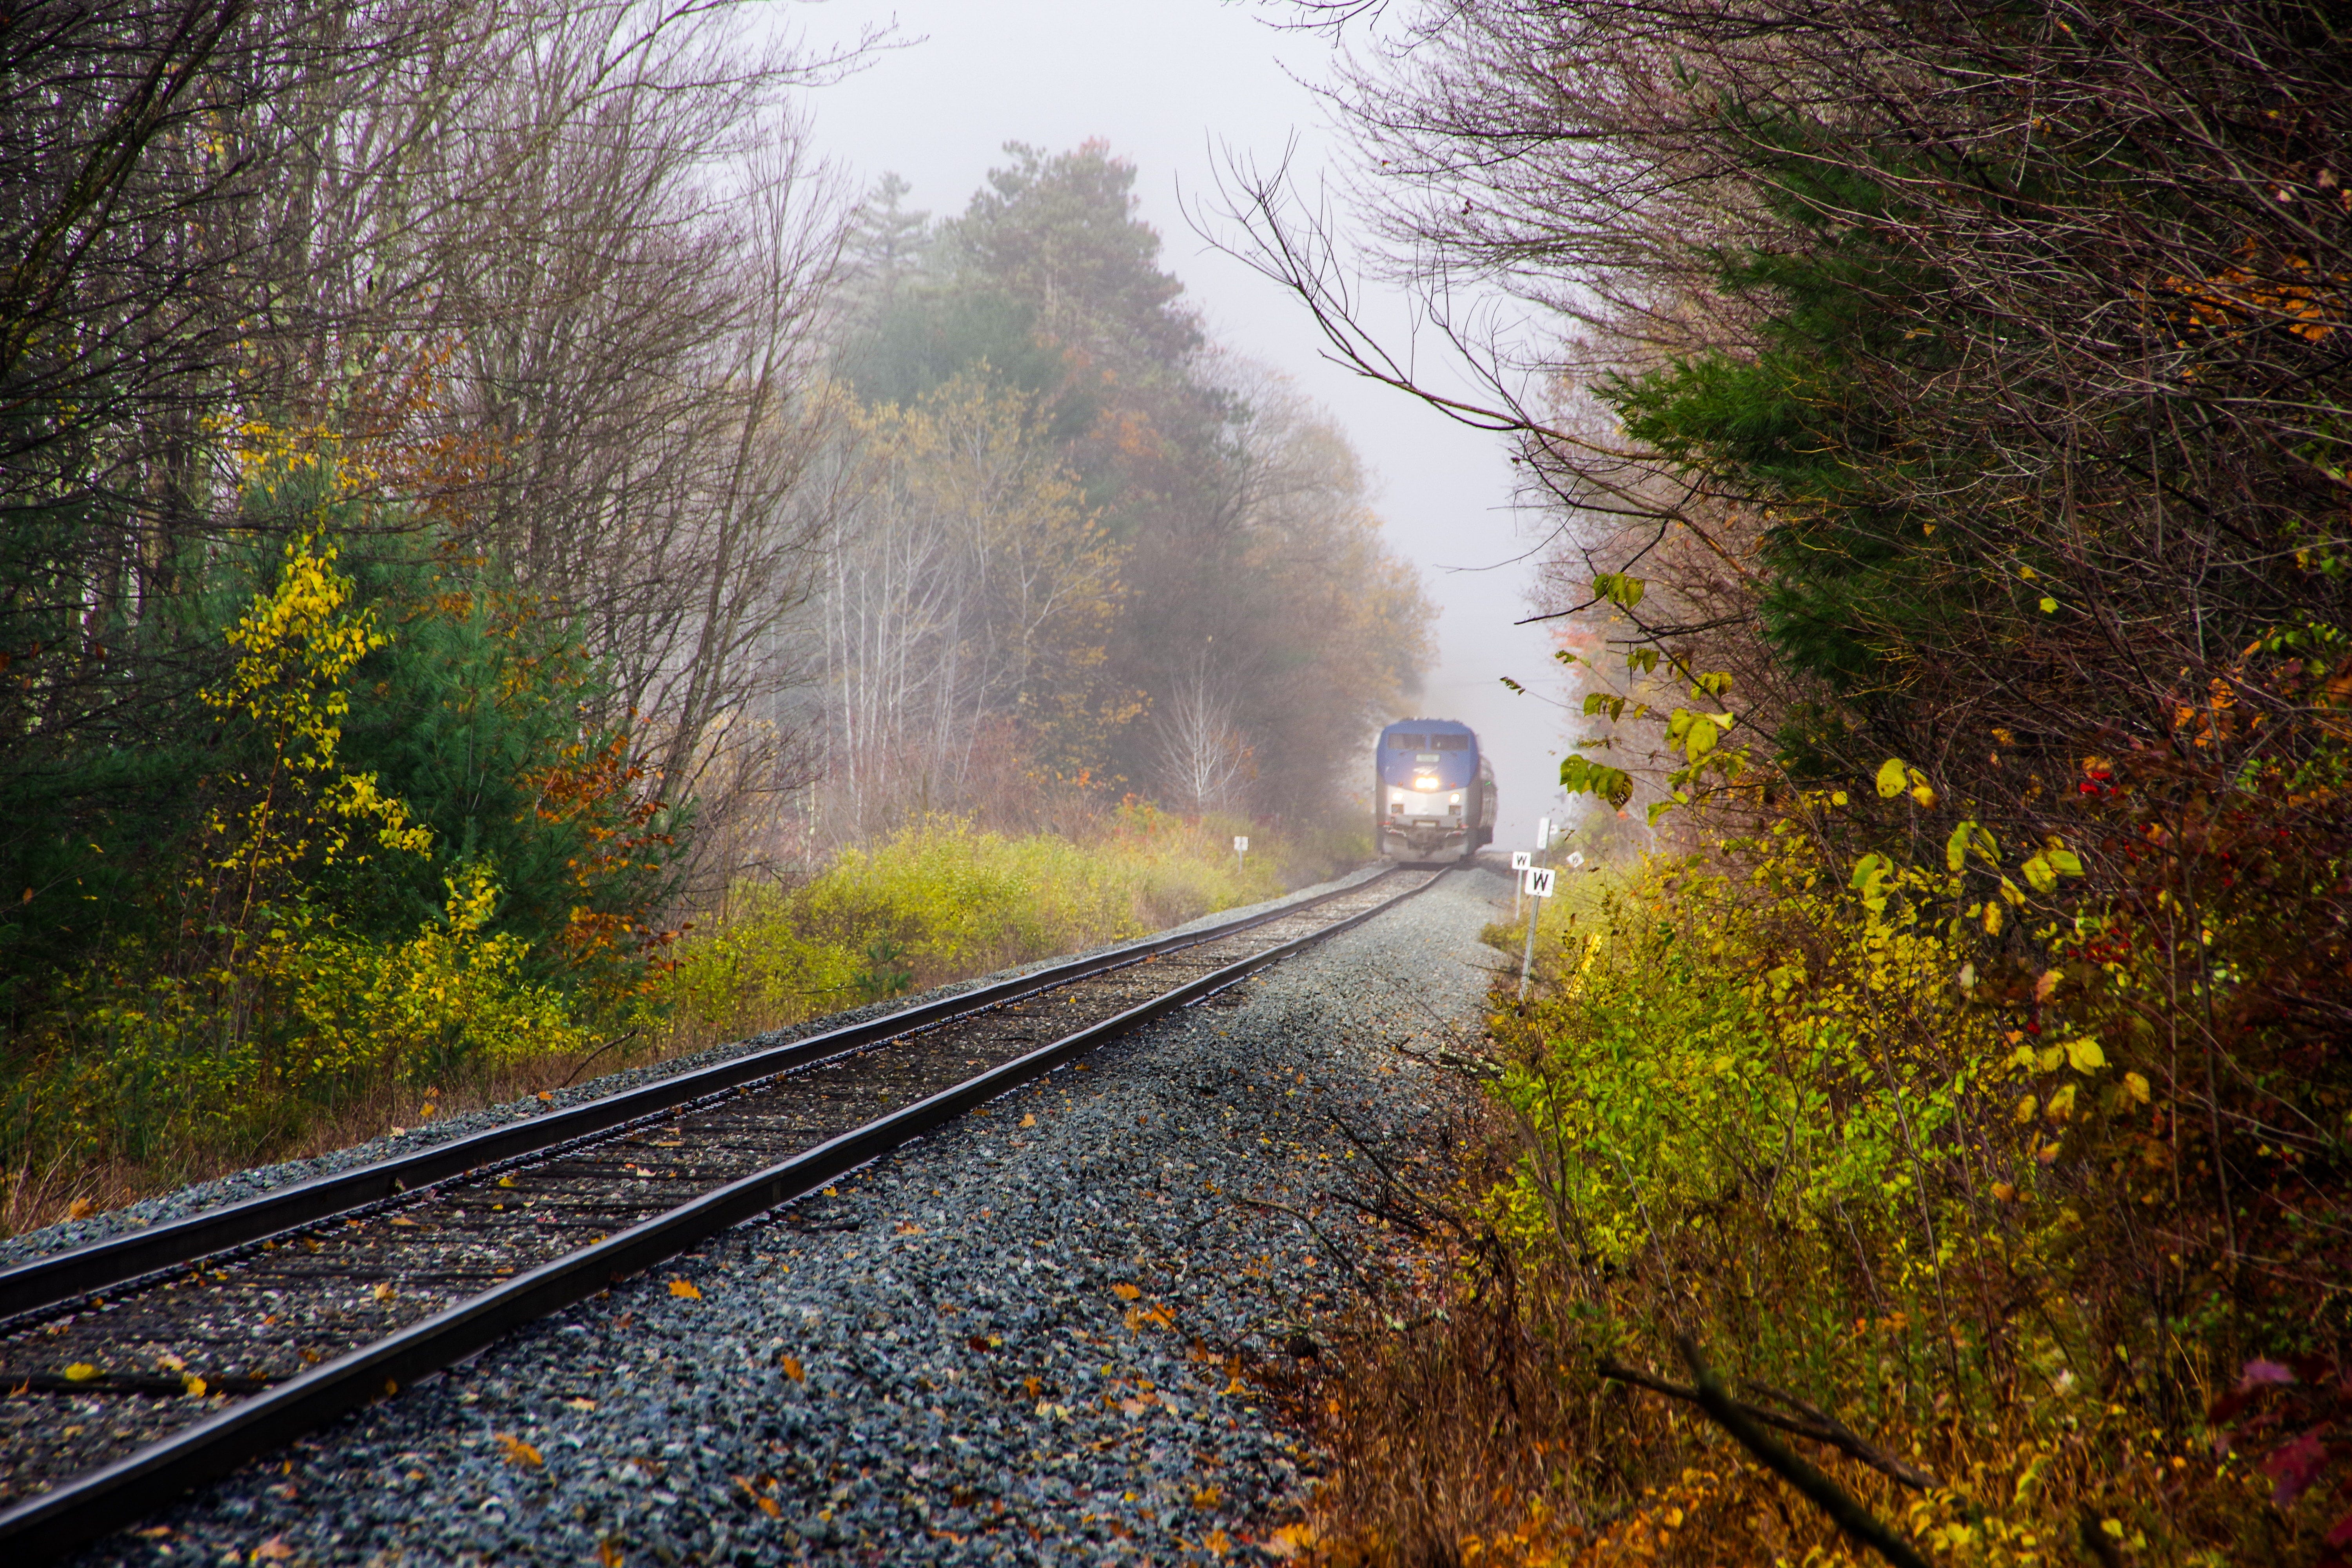 Family vacation ideas for fall: 10 best foliage train rides in the US